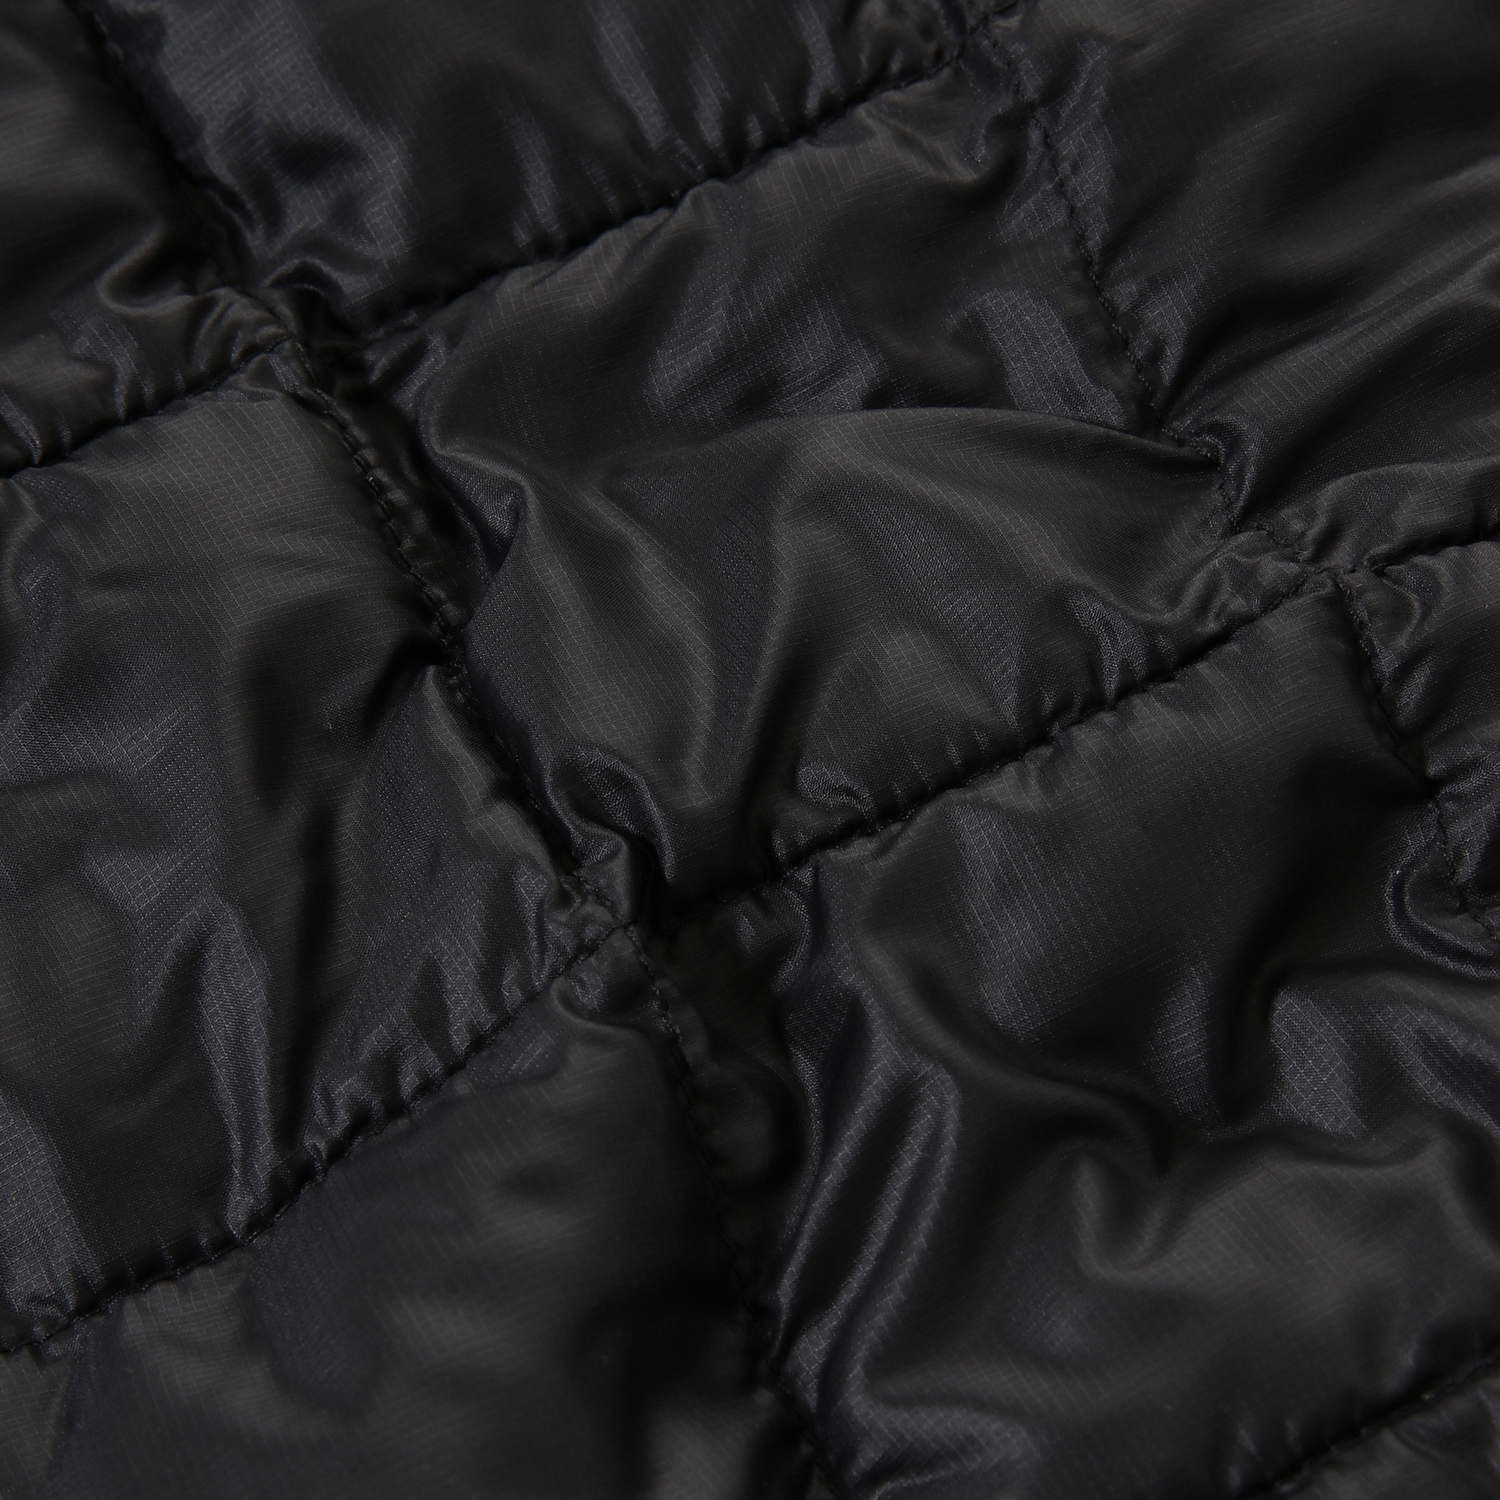 Куртка The North Face Thermoball Eco Jacket 2.0 Black